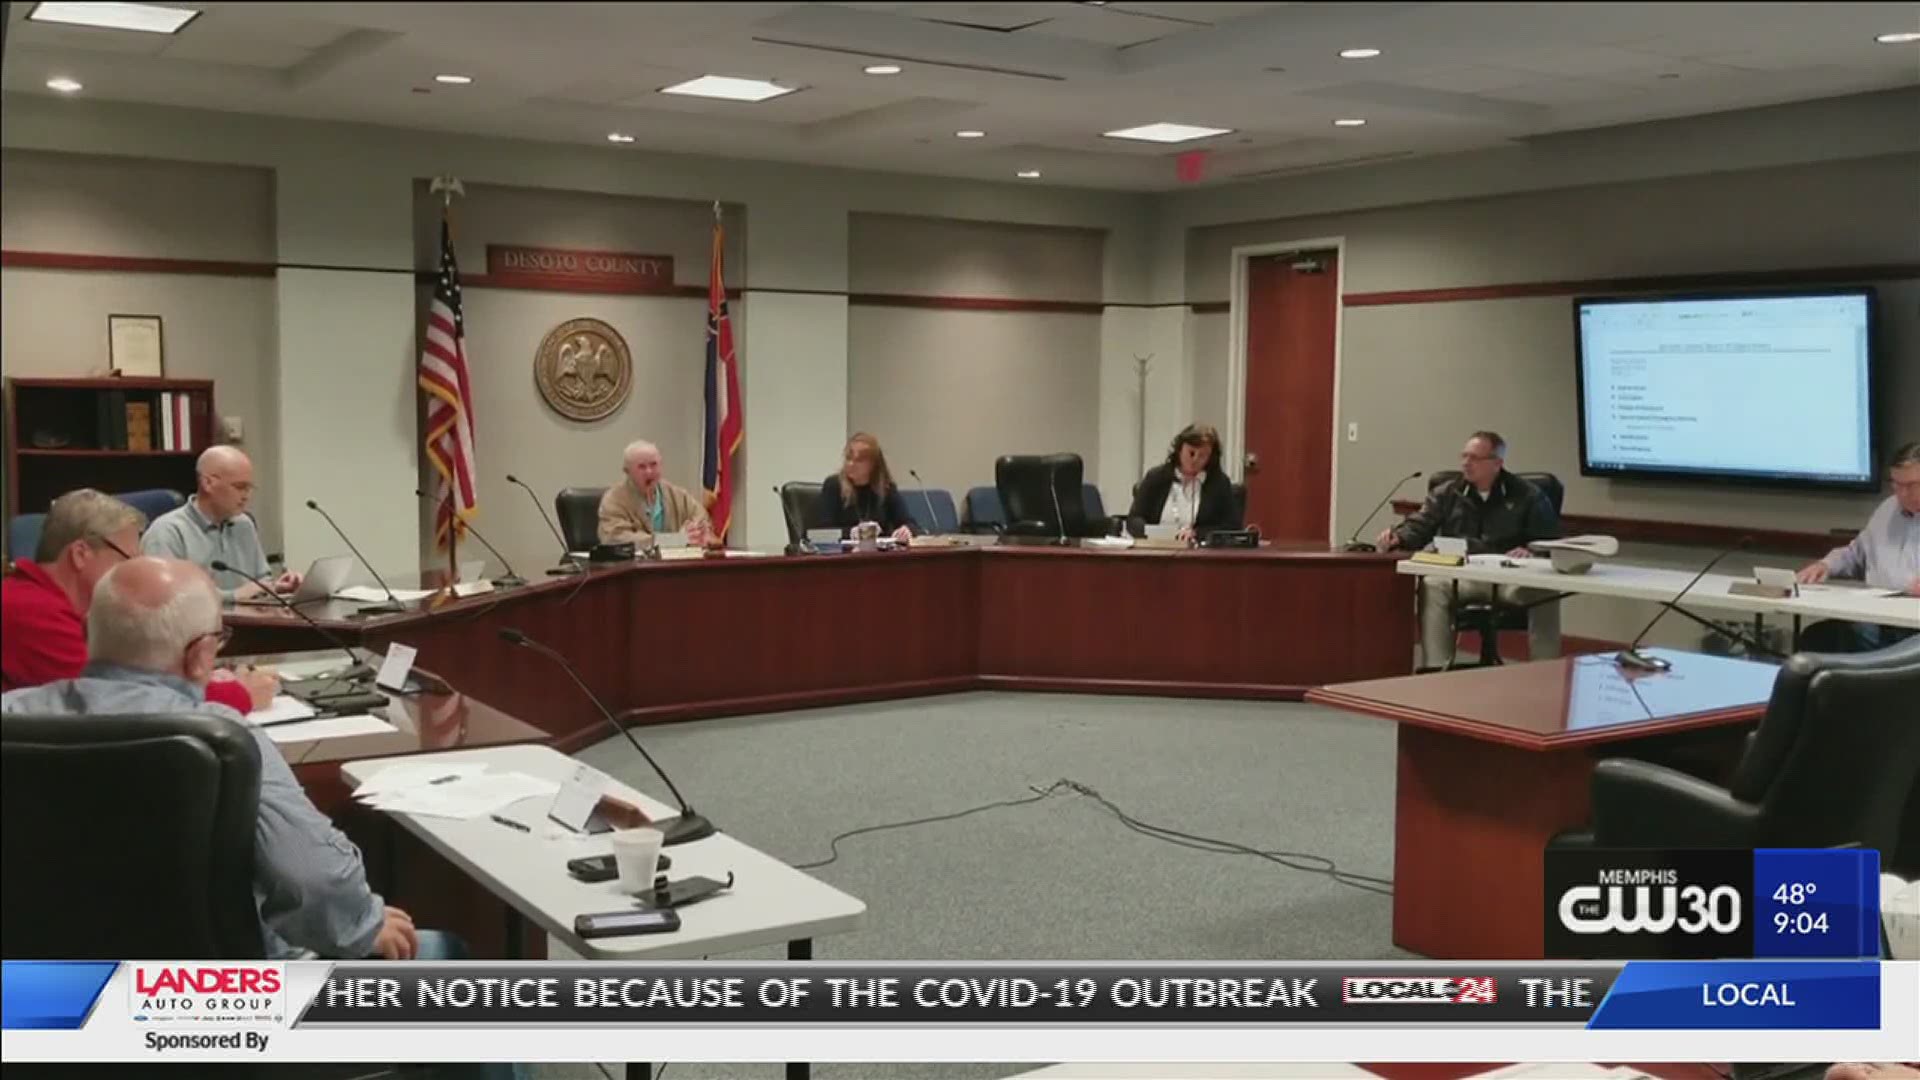 A SPECIAL BOARD MEETING WAS HELD SUNDAY TO DISCUSS THE LATEST PROCEDURES FOR DESOTO COUNTY.